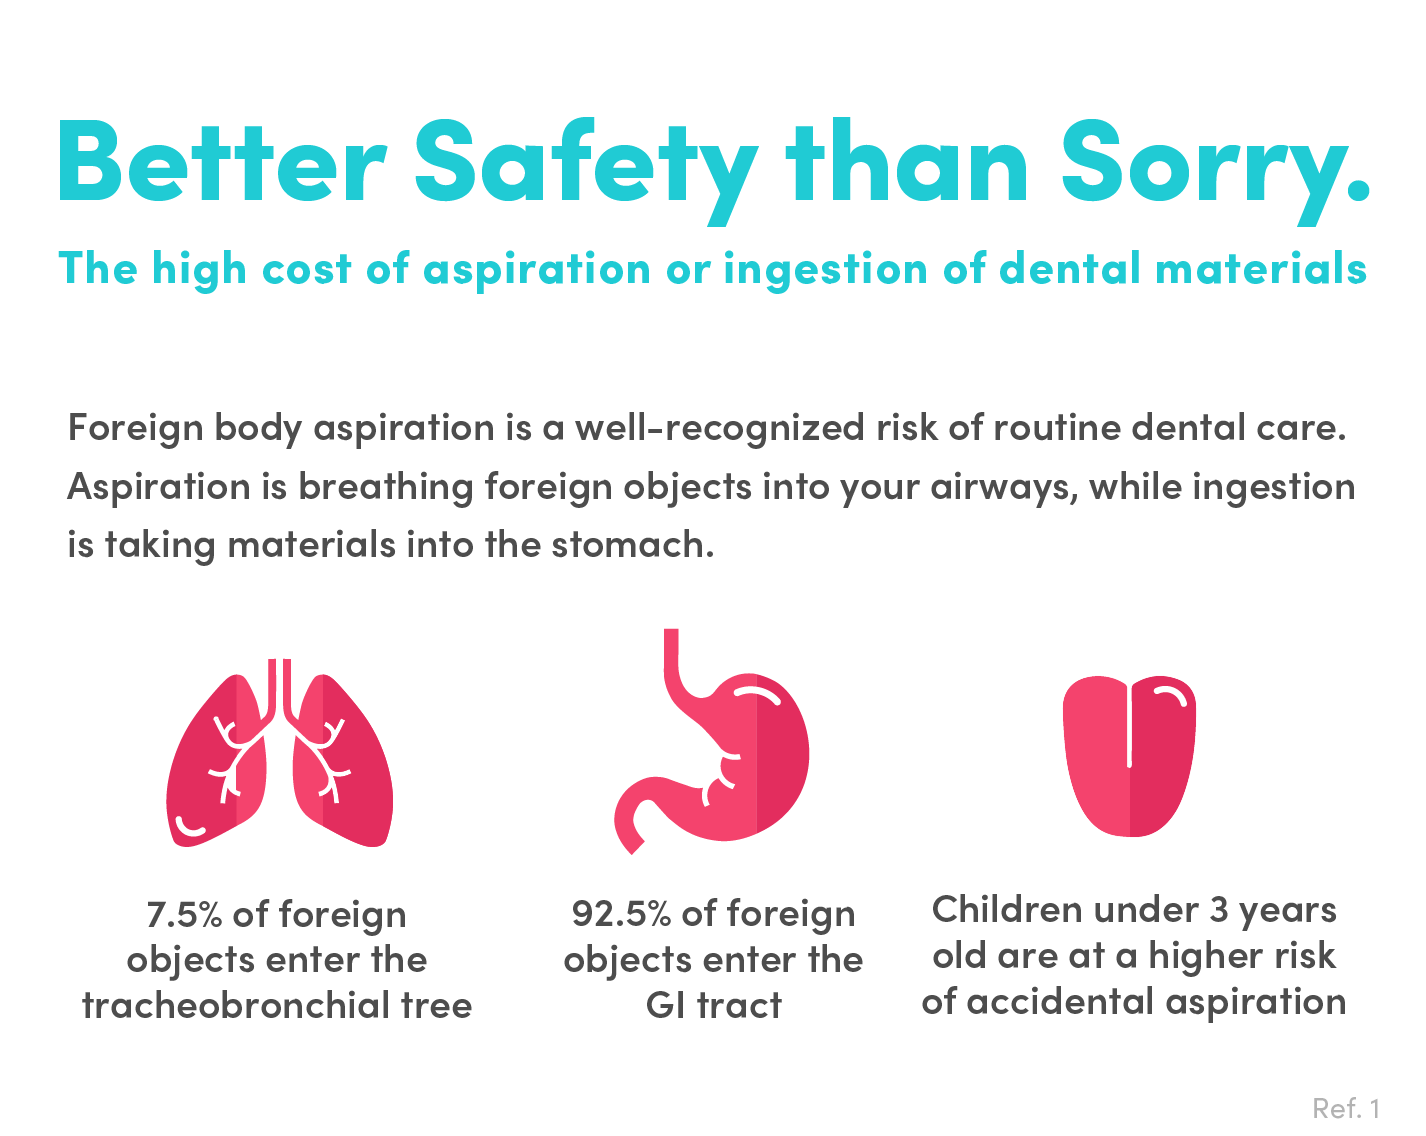 High Cost of Aspiration or Ingestion of Dental saterials